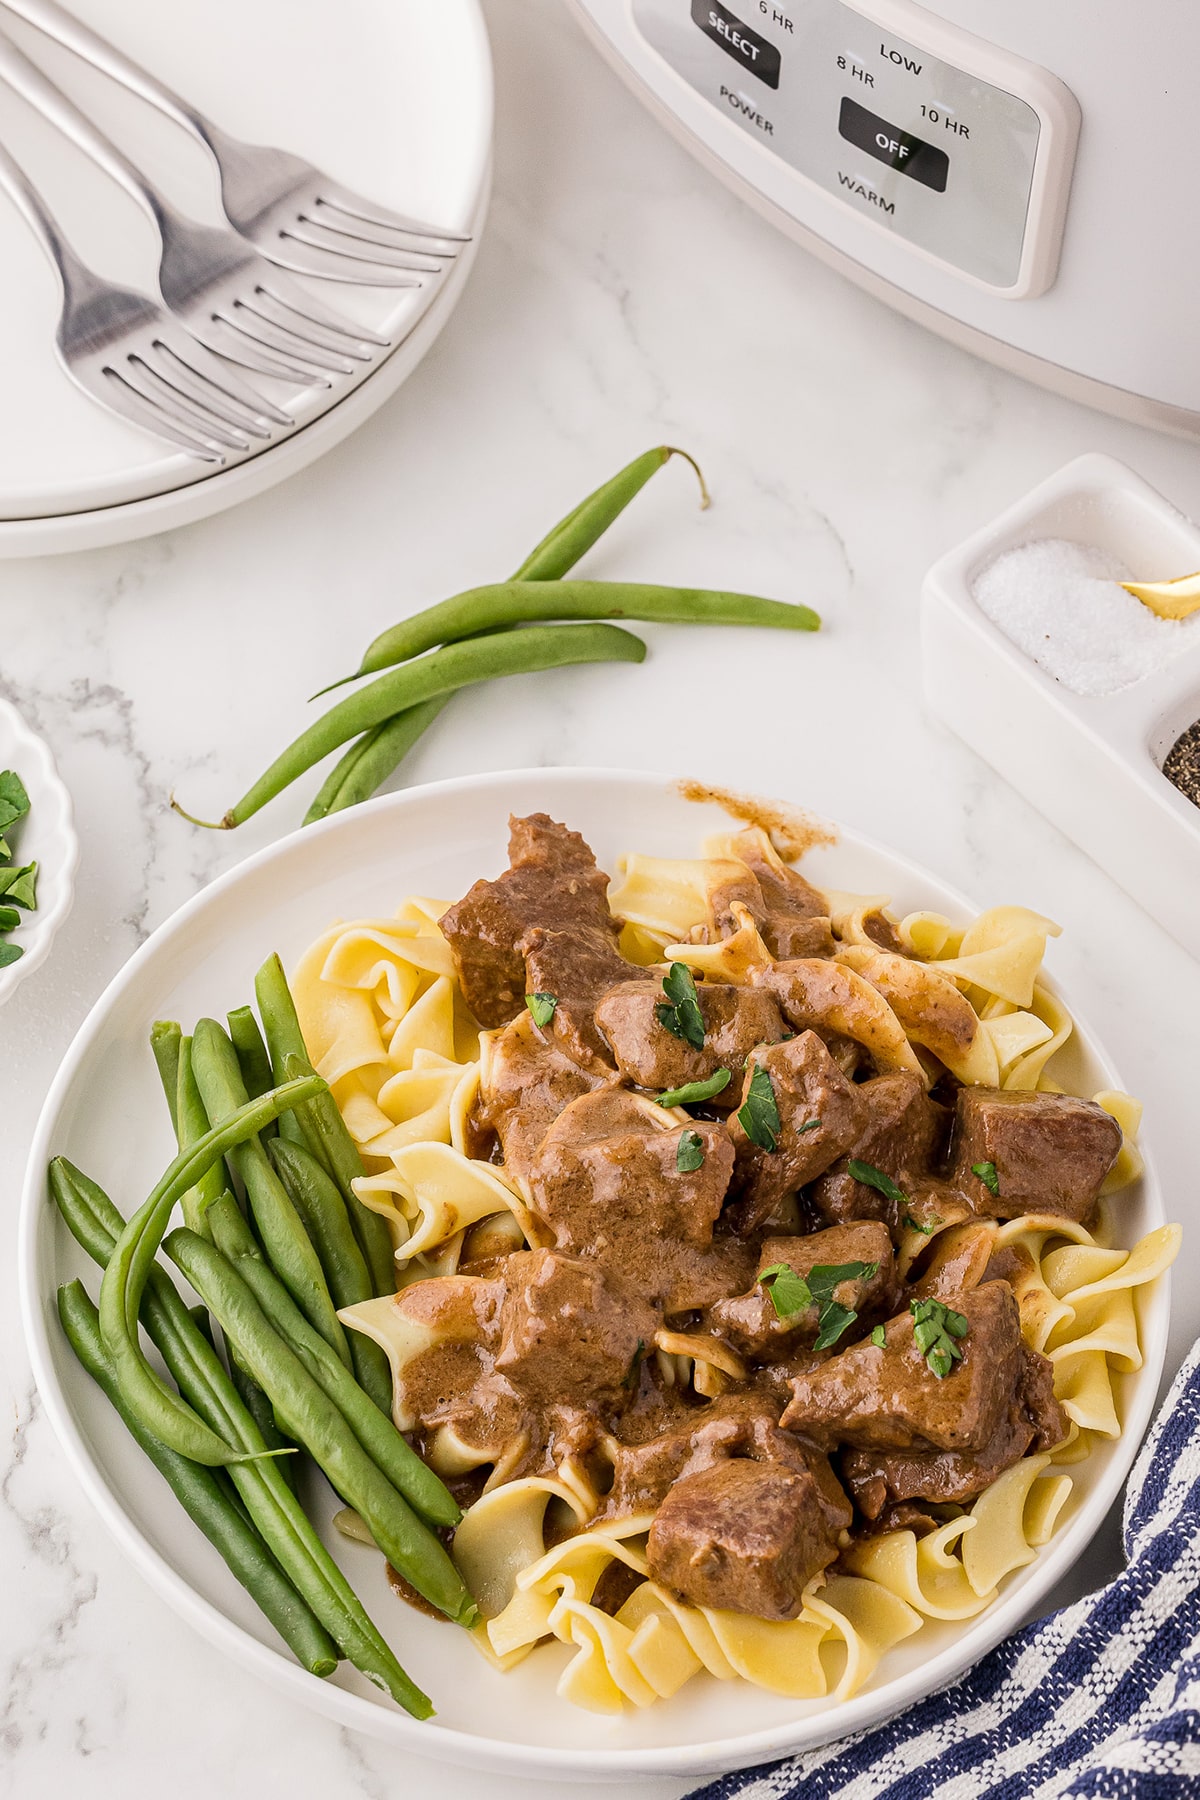 a dinner plate with egg noodles, beef tips in gravy, and green beans on a white marble counter, with salt and pepper wells, a crock pot, and plates with three forks in the background